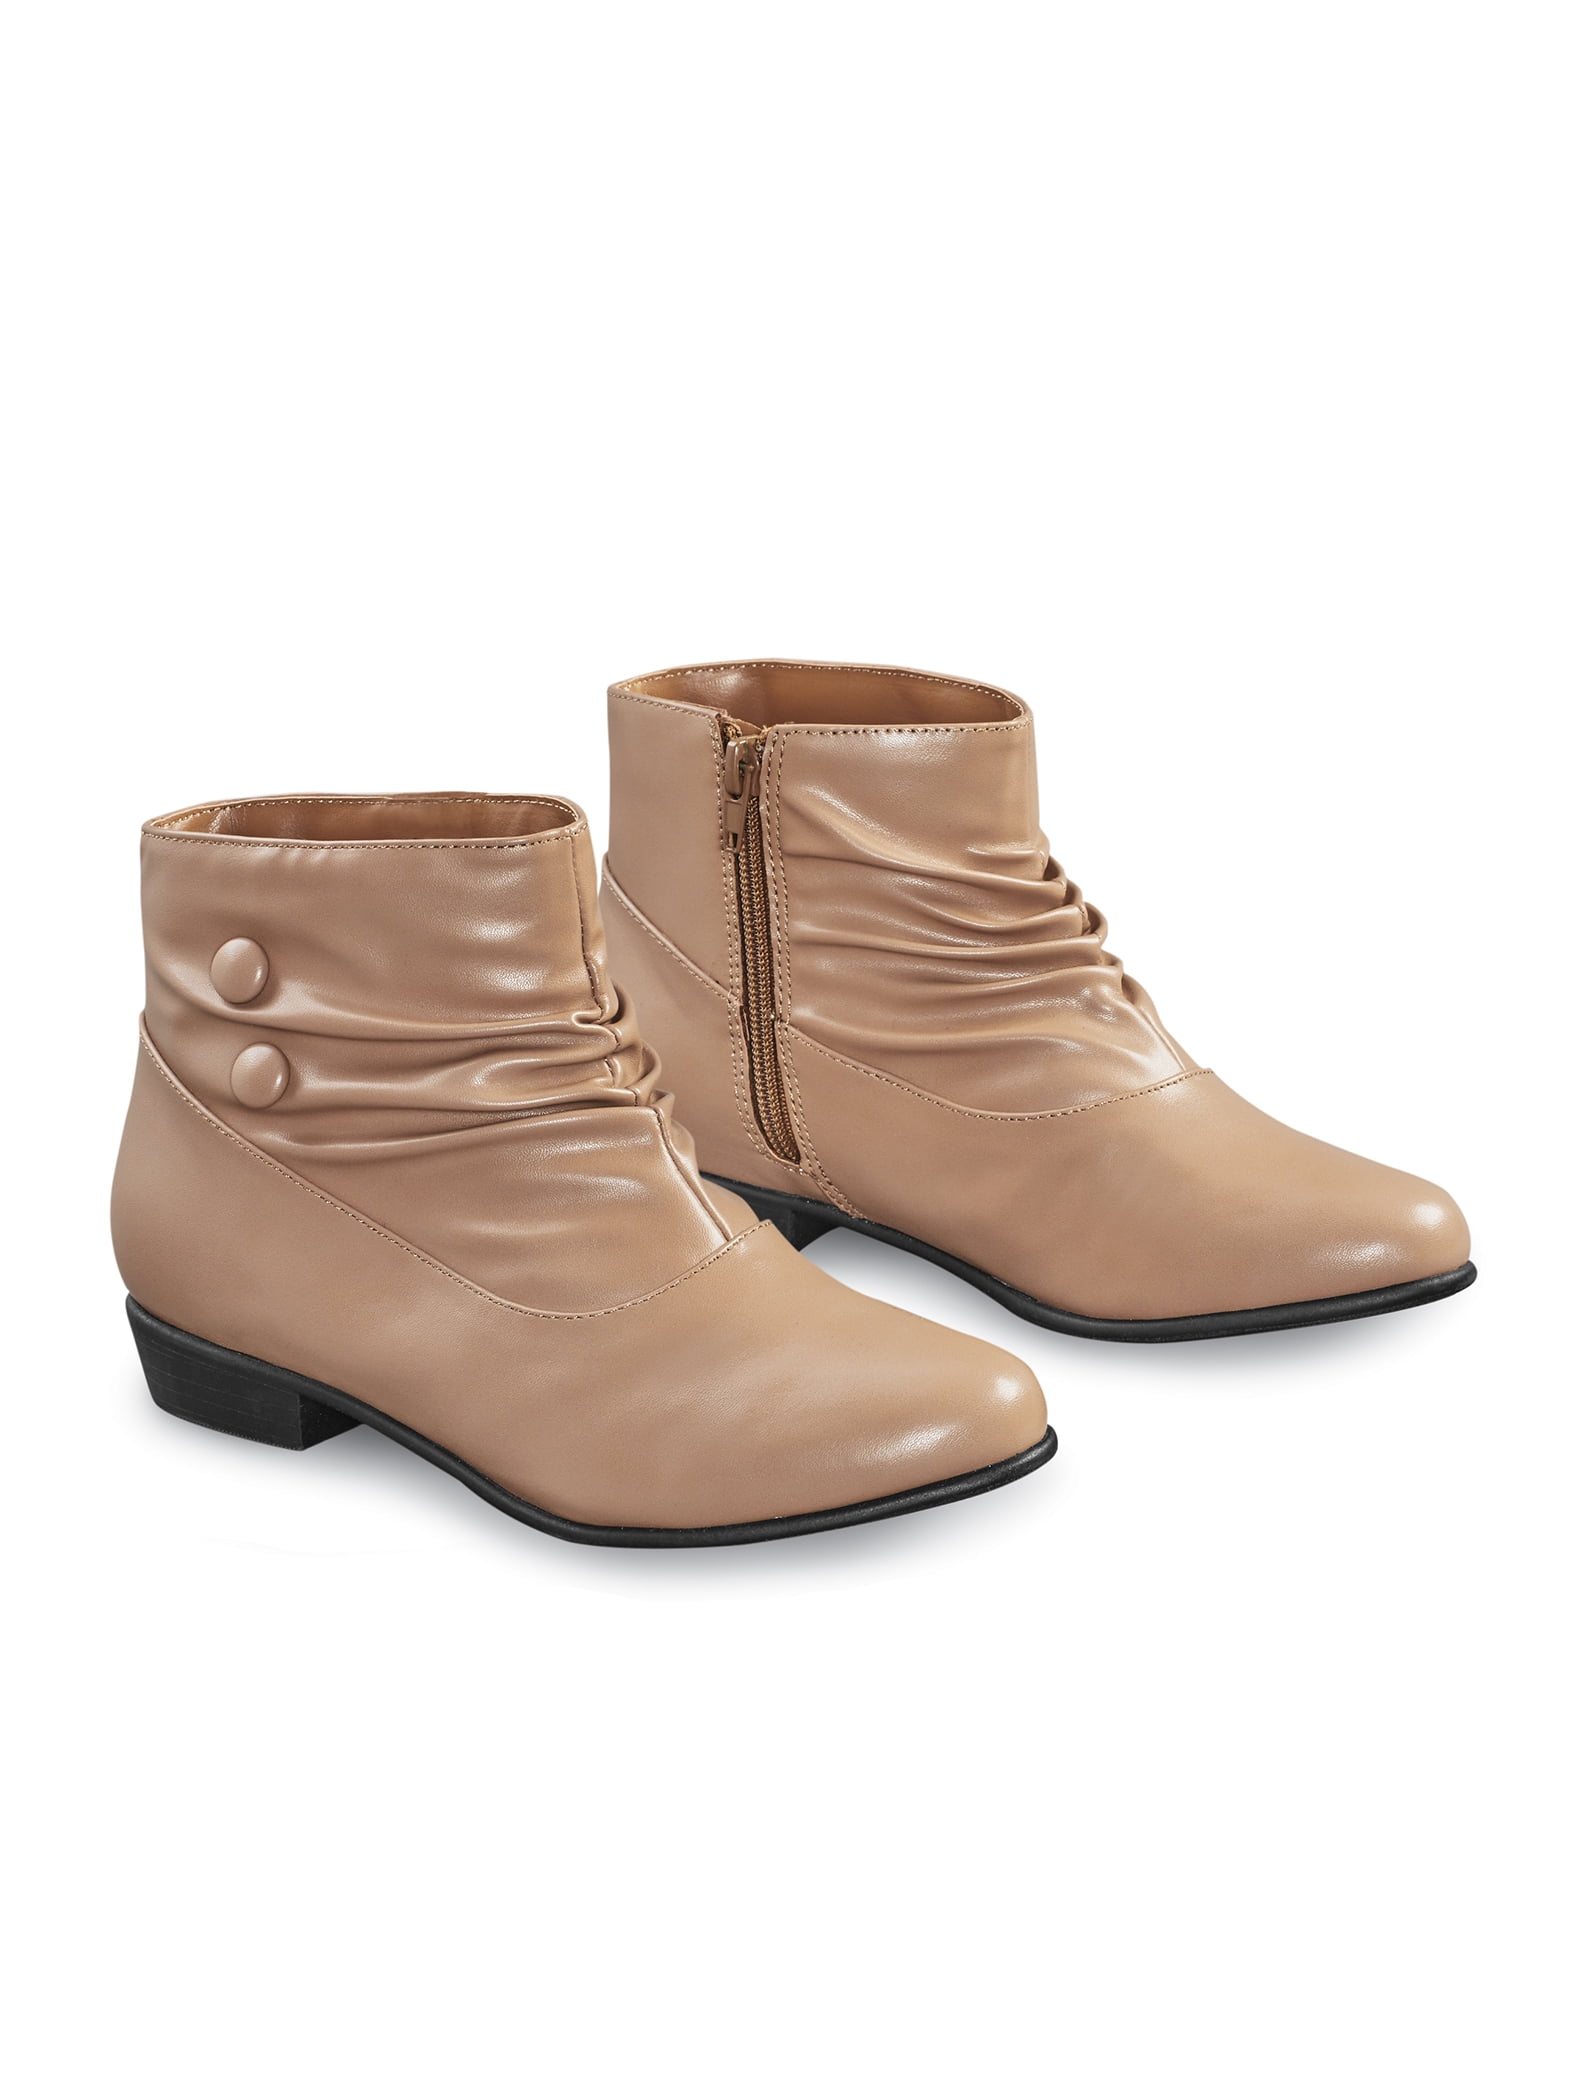 Collections Etc. - Collections Etc Women's Button Ankle Slouch Boots w ...